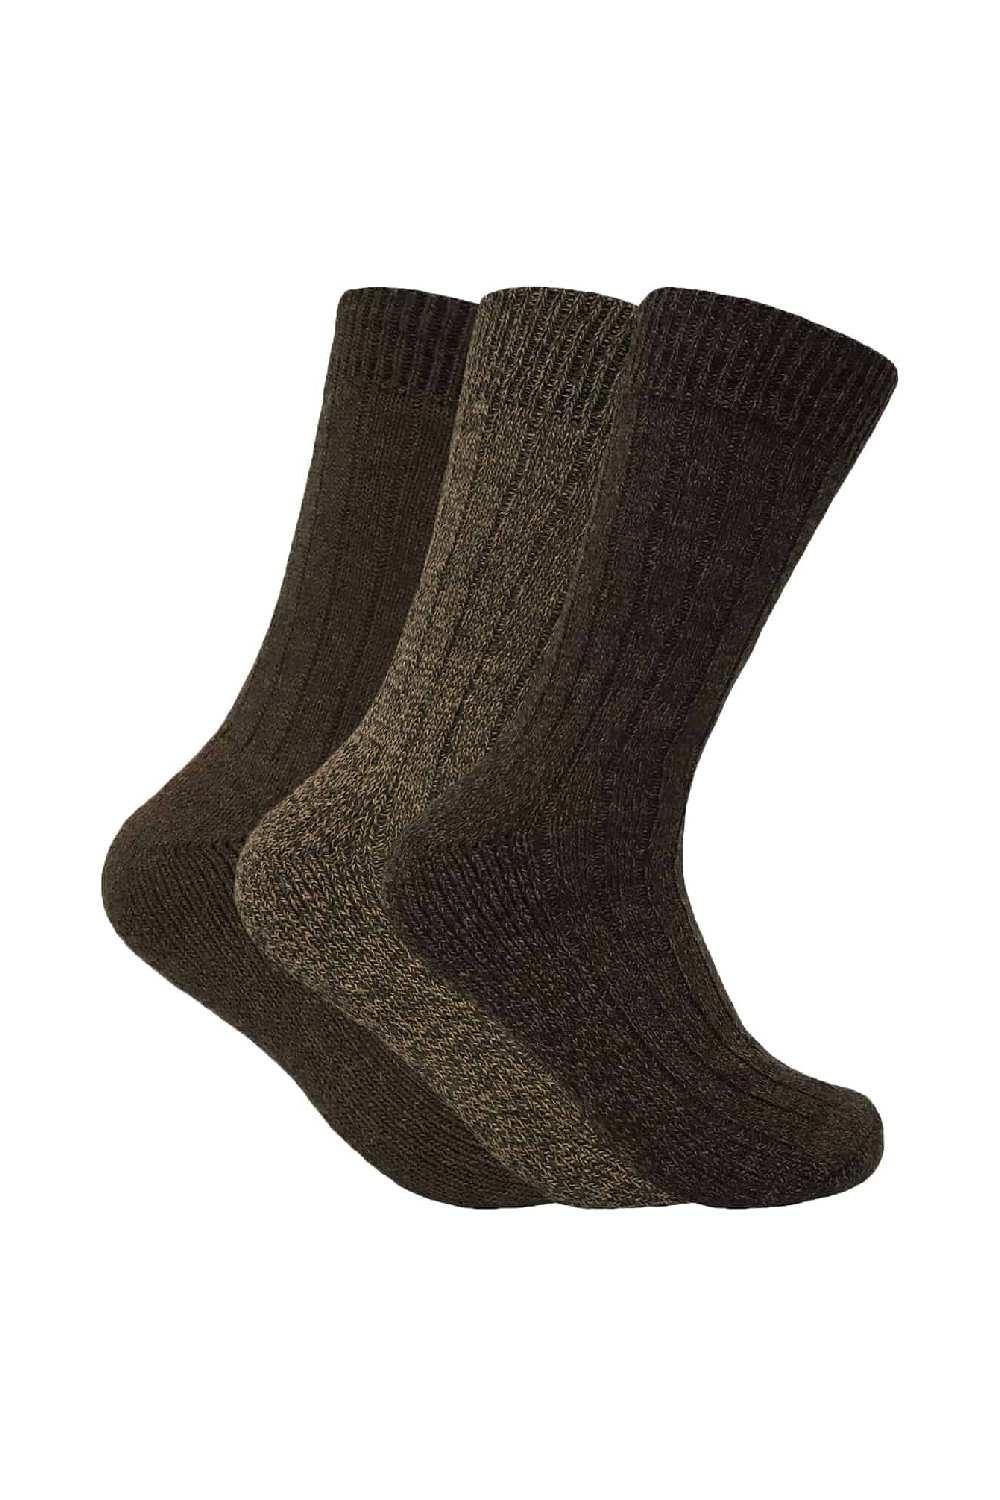 3 Pairs Cushioned Sole Wool Blend Walking Hiking Socks for Boots